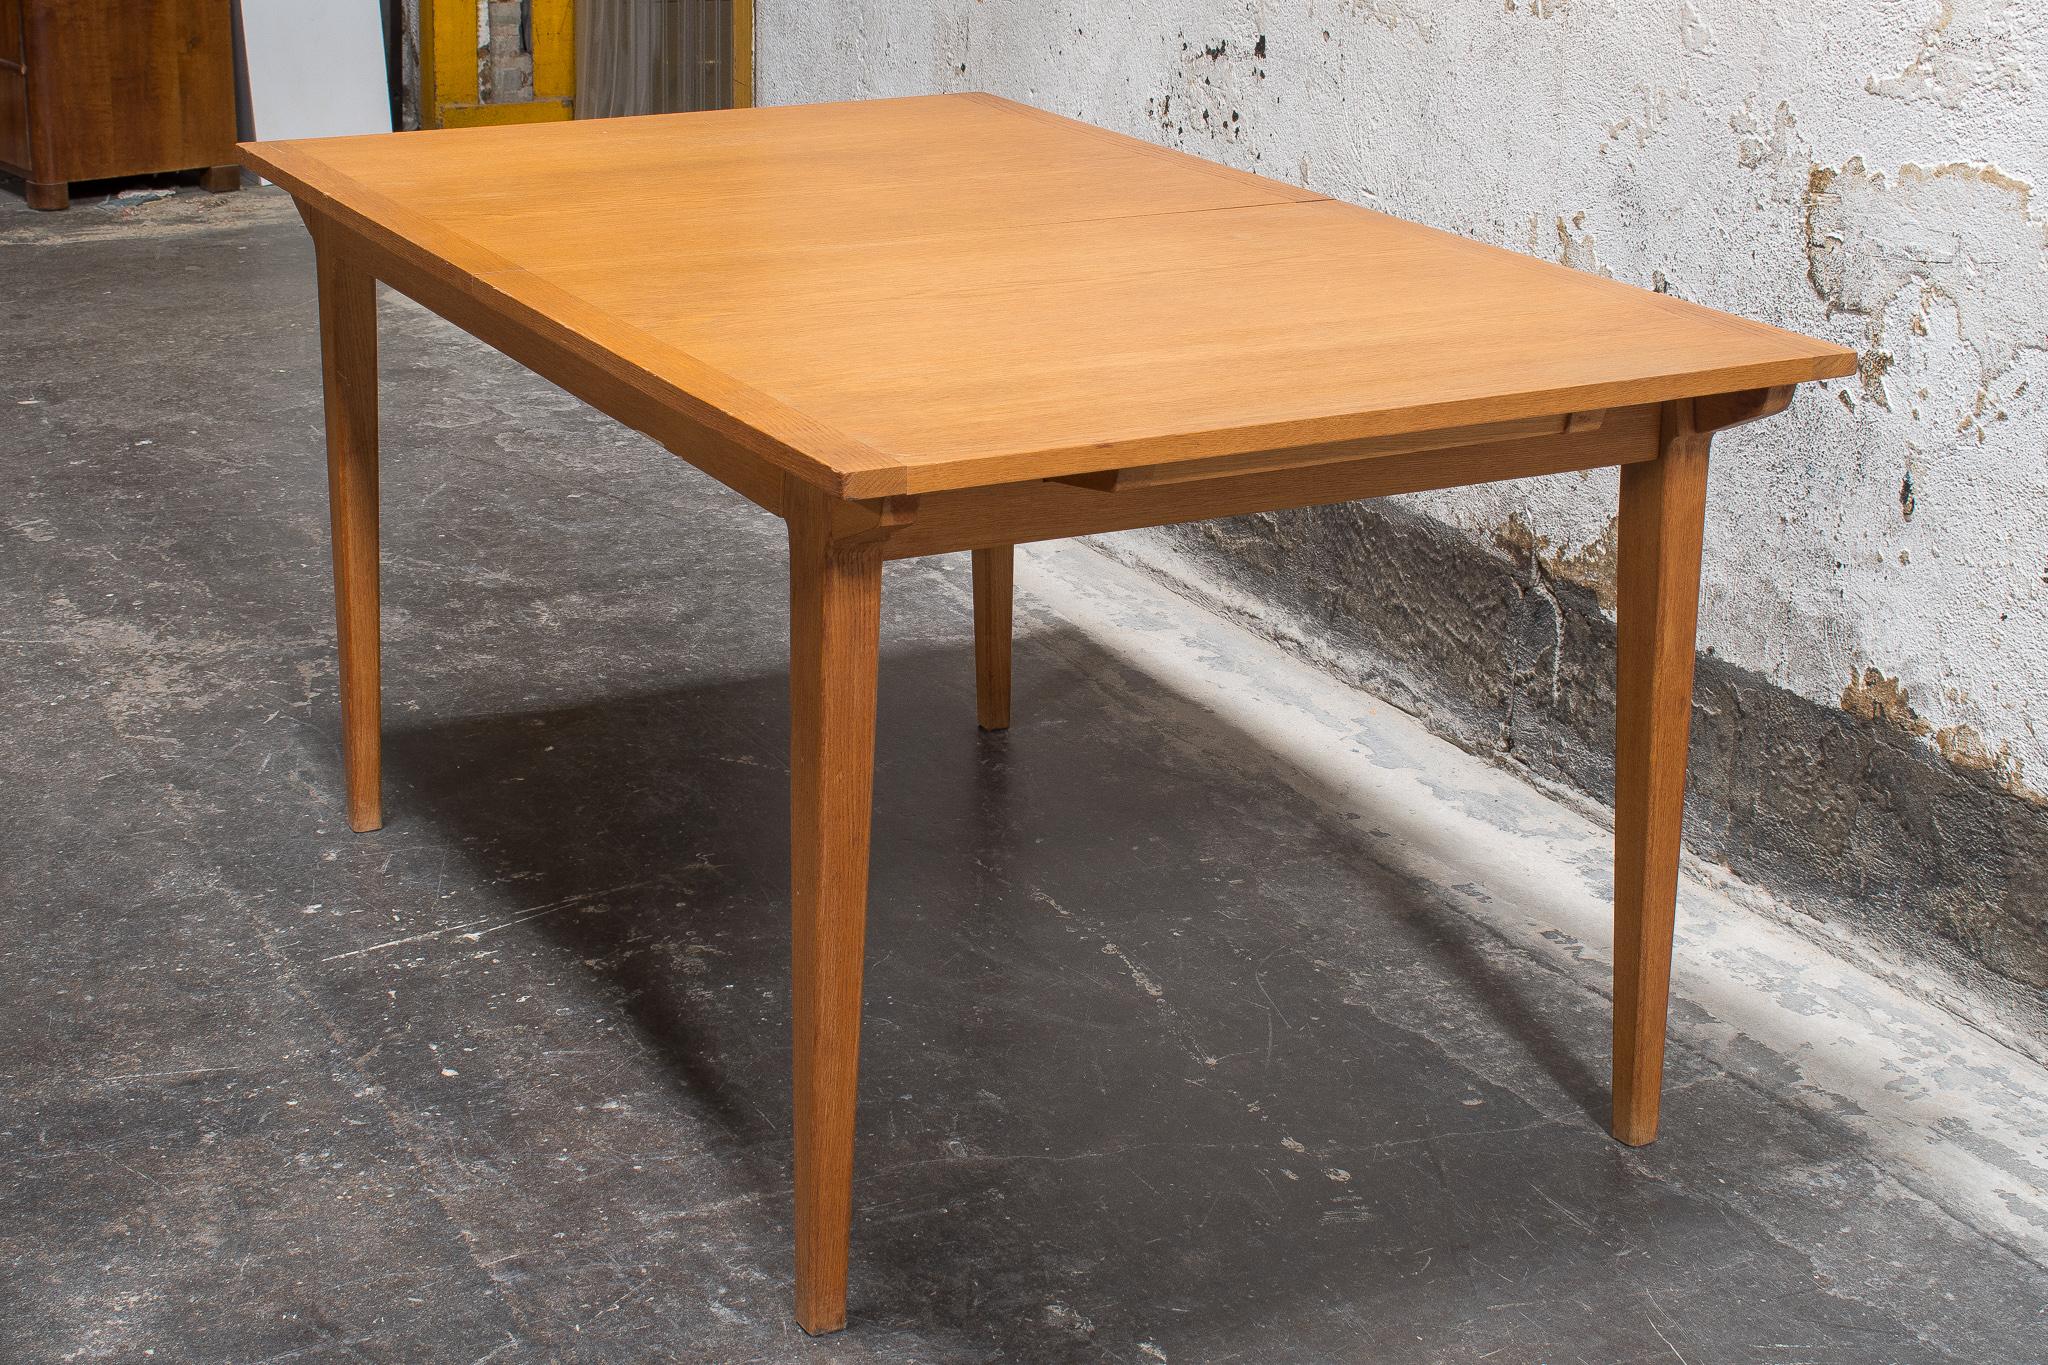 Swedish Mid-Century Modern dining table made of Golden Oak. A modern table with clean lines and a natural finish, it's the perfect relaxed backdrop for your next meal. The dining table is attributed to noted Swedish designer, Bengt Ruda. Ruda